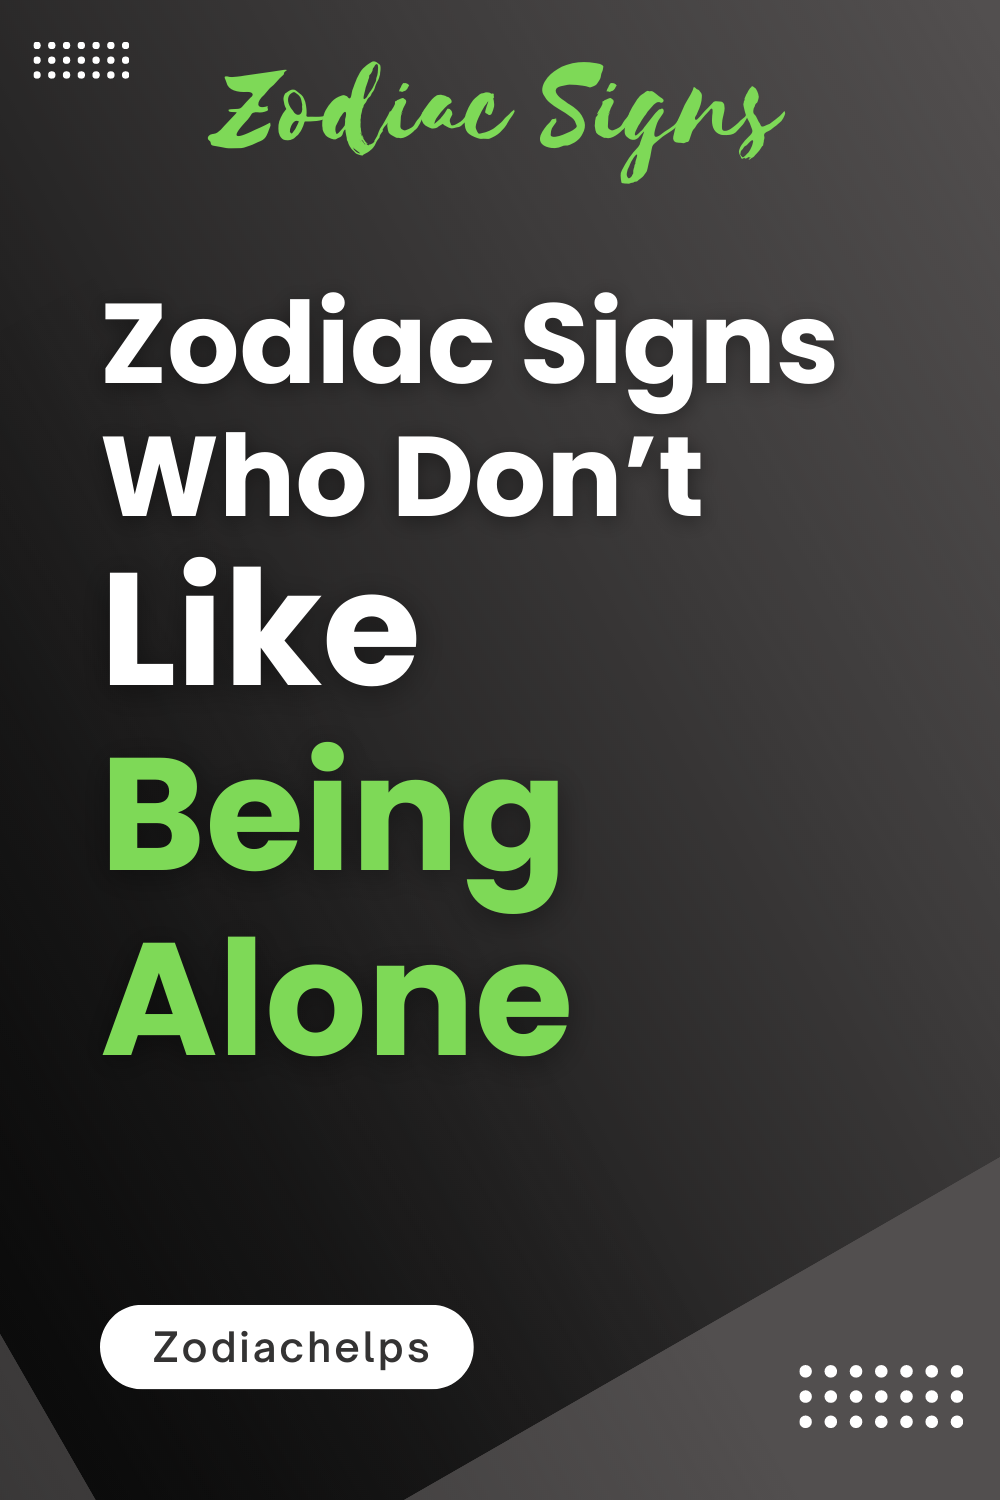 Zodiac Signs Who Don’t Like Being Alone